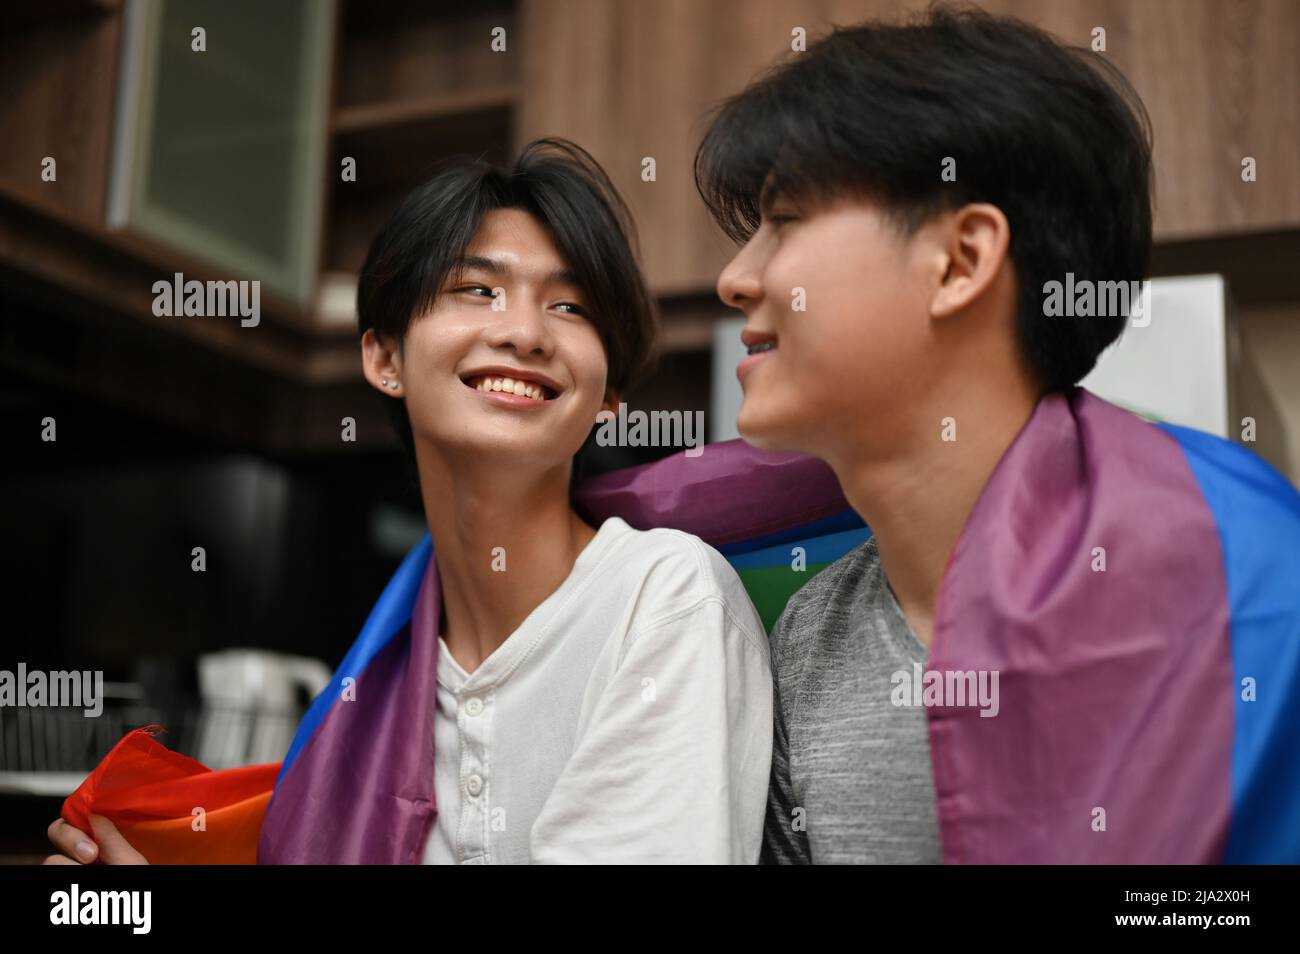 LGBT couples concept, Asian teenage gay men's couple face to face, sharing a special romantic love feeling for each other in the kitchen. Stock Photo